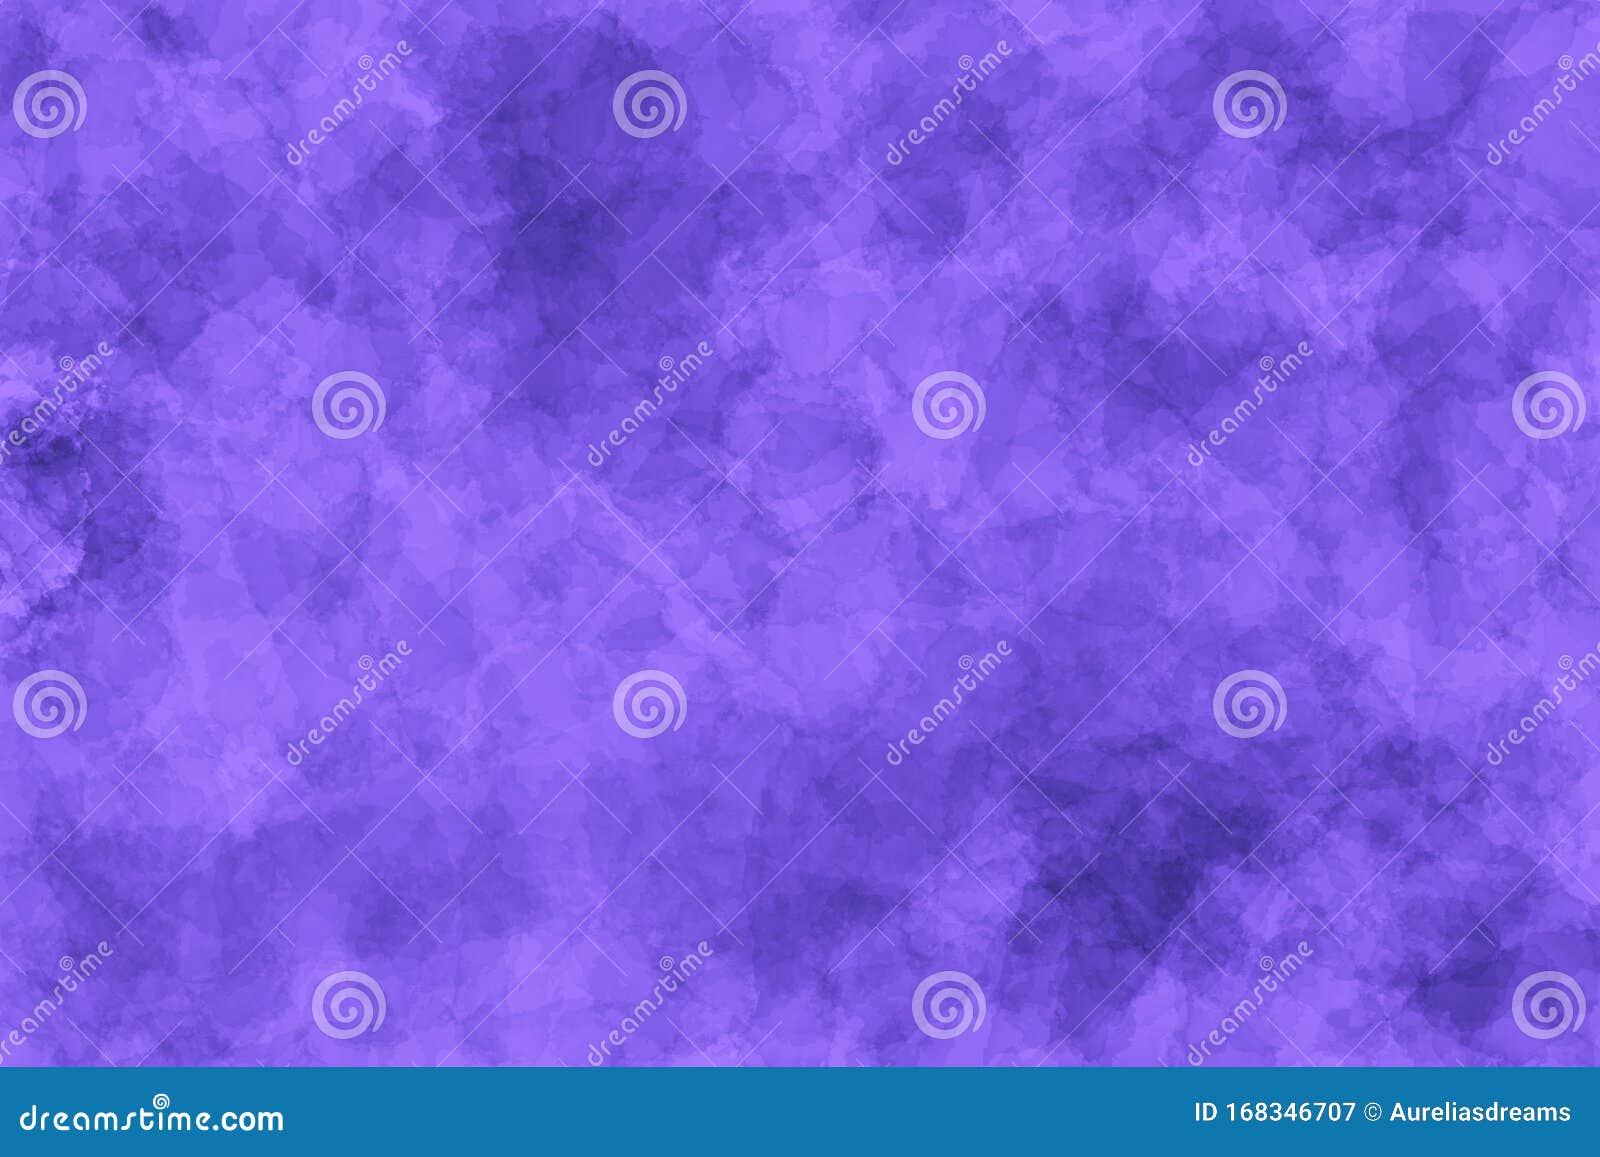 Digital Painted Background in Shades of Lilac. Variety Paint Mix on ...